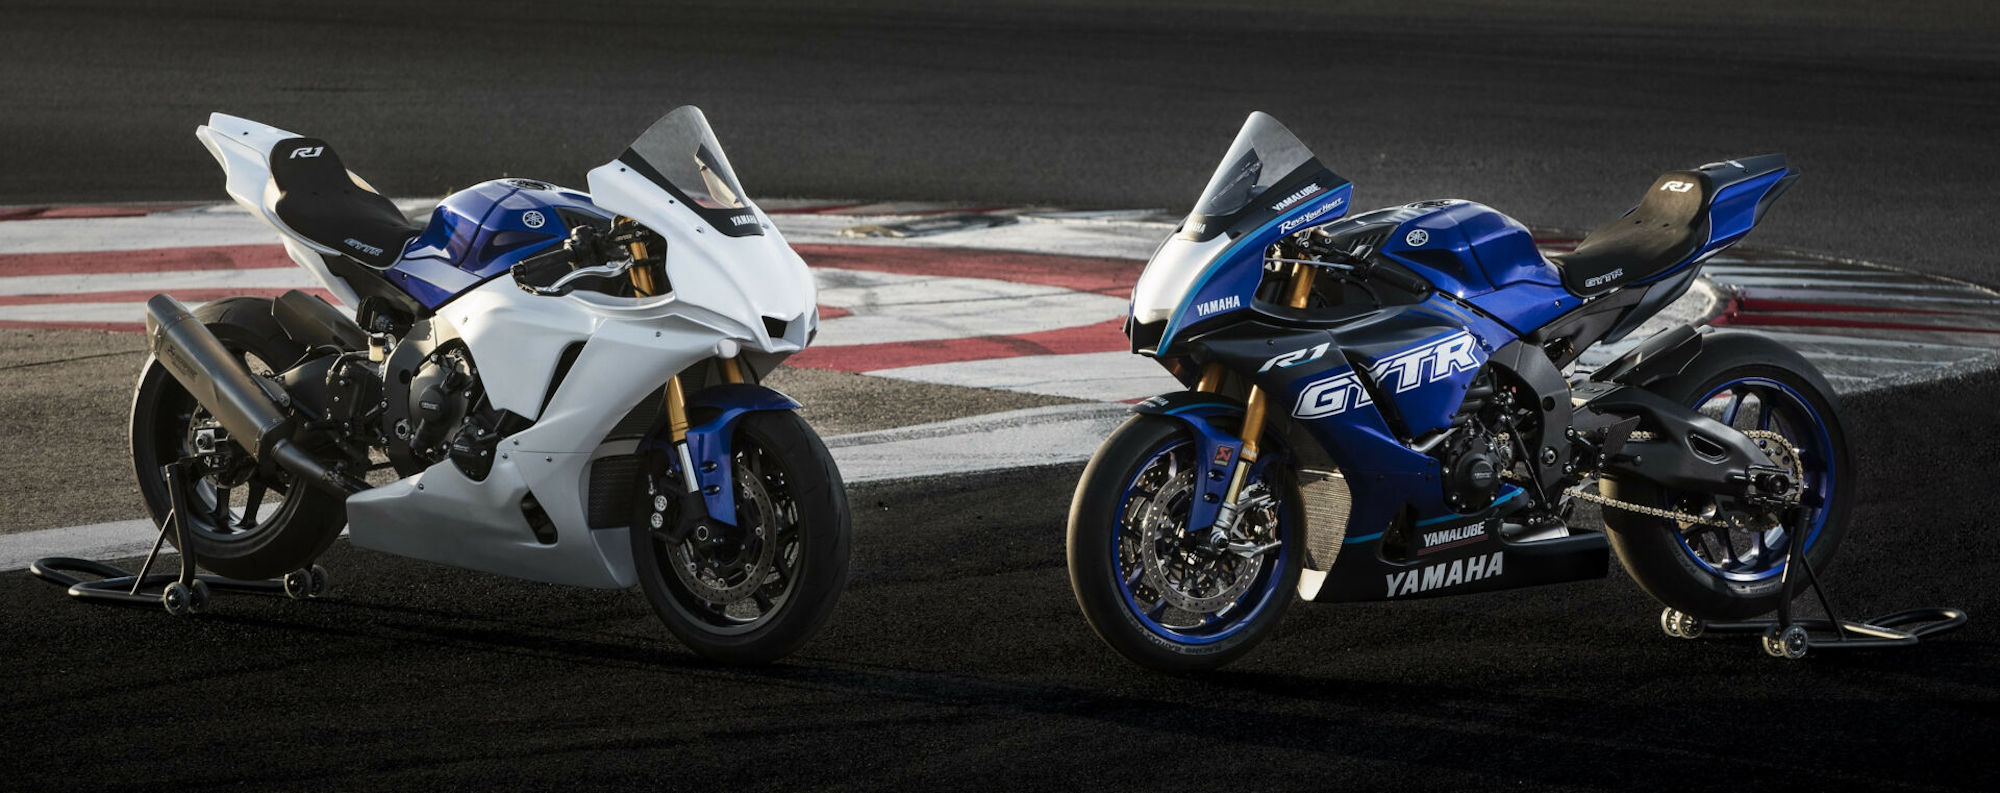 A view of Yamaha's R1. Media sourced from Roadracing World.